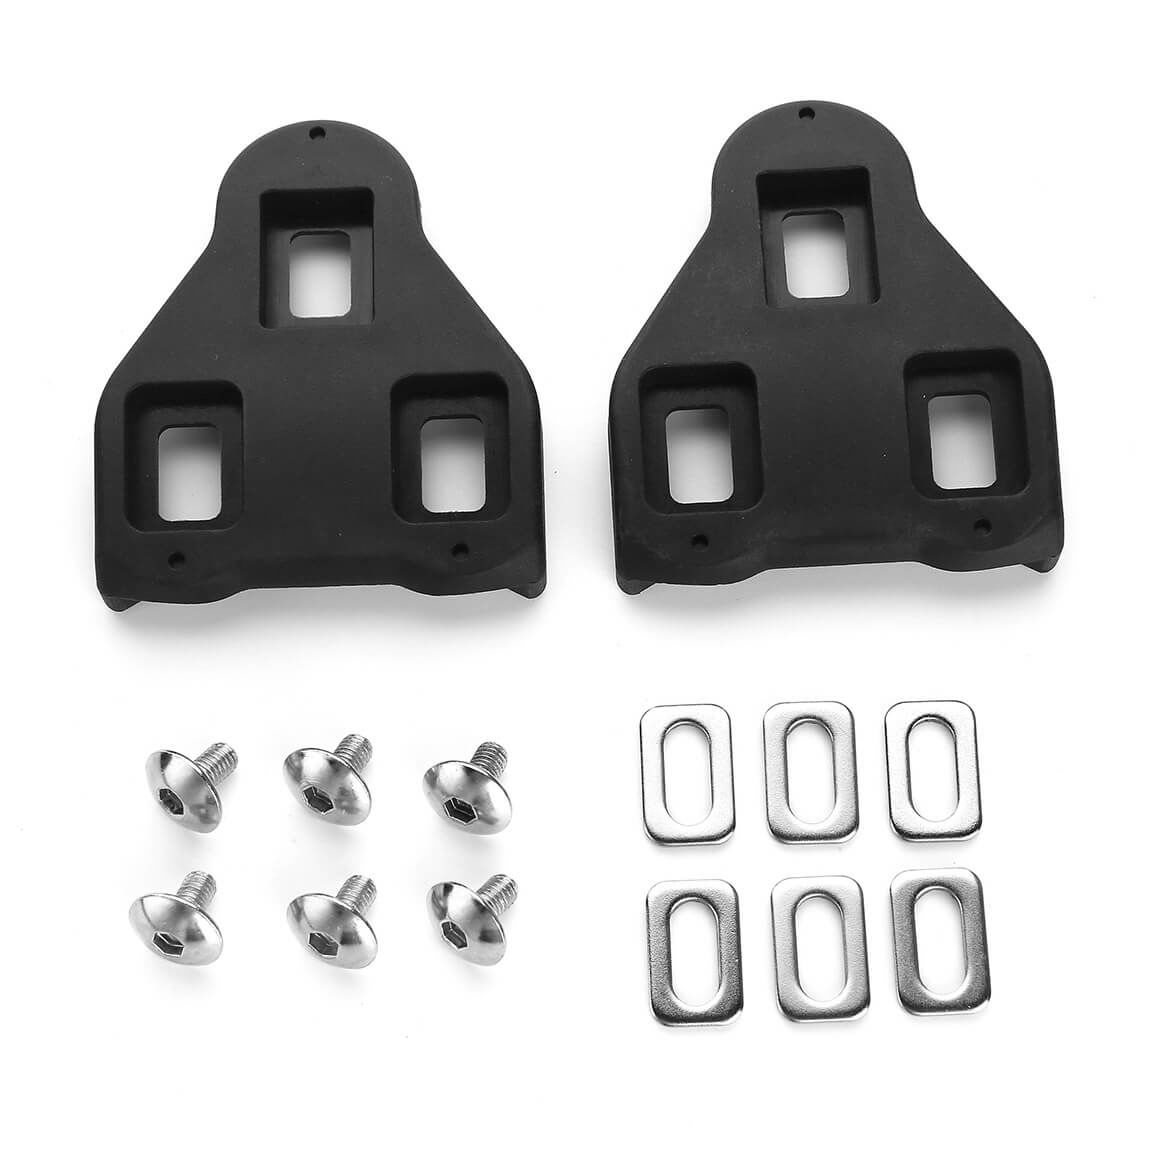 Details about  / New Bike Cleats Compatible with Look KEO Pedals With 7 Degree Float for Road Use